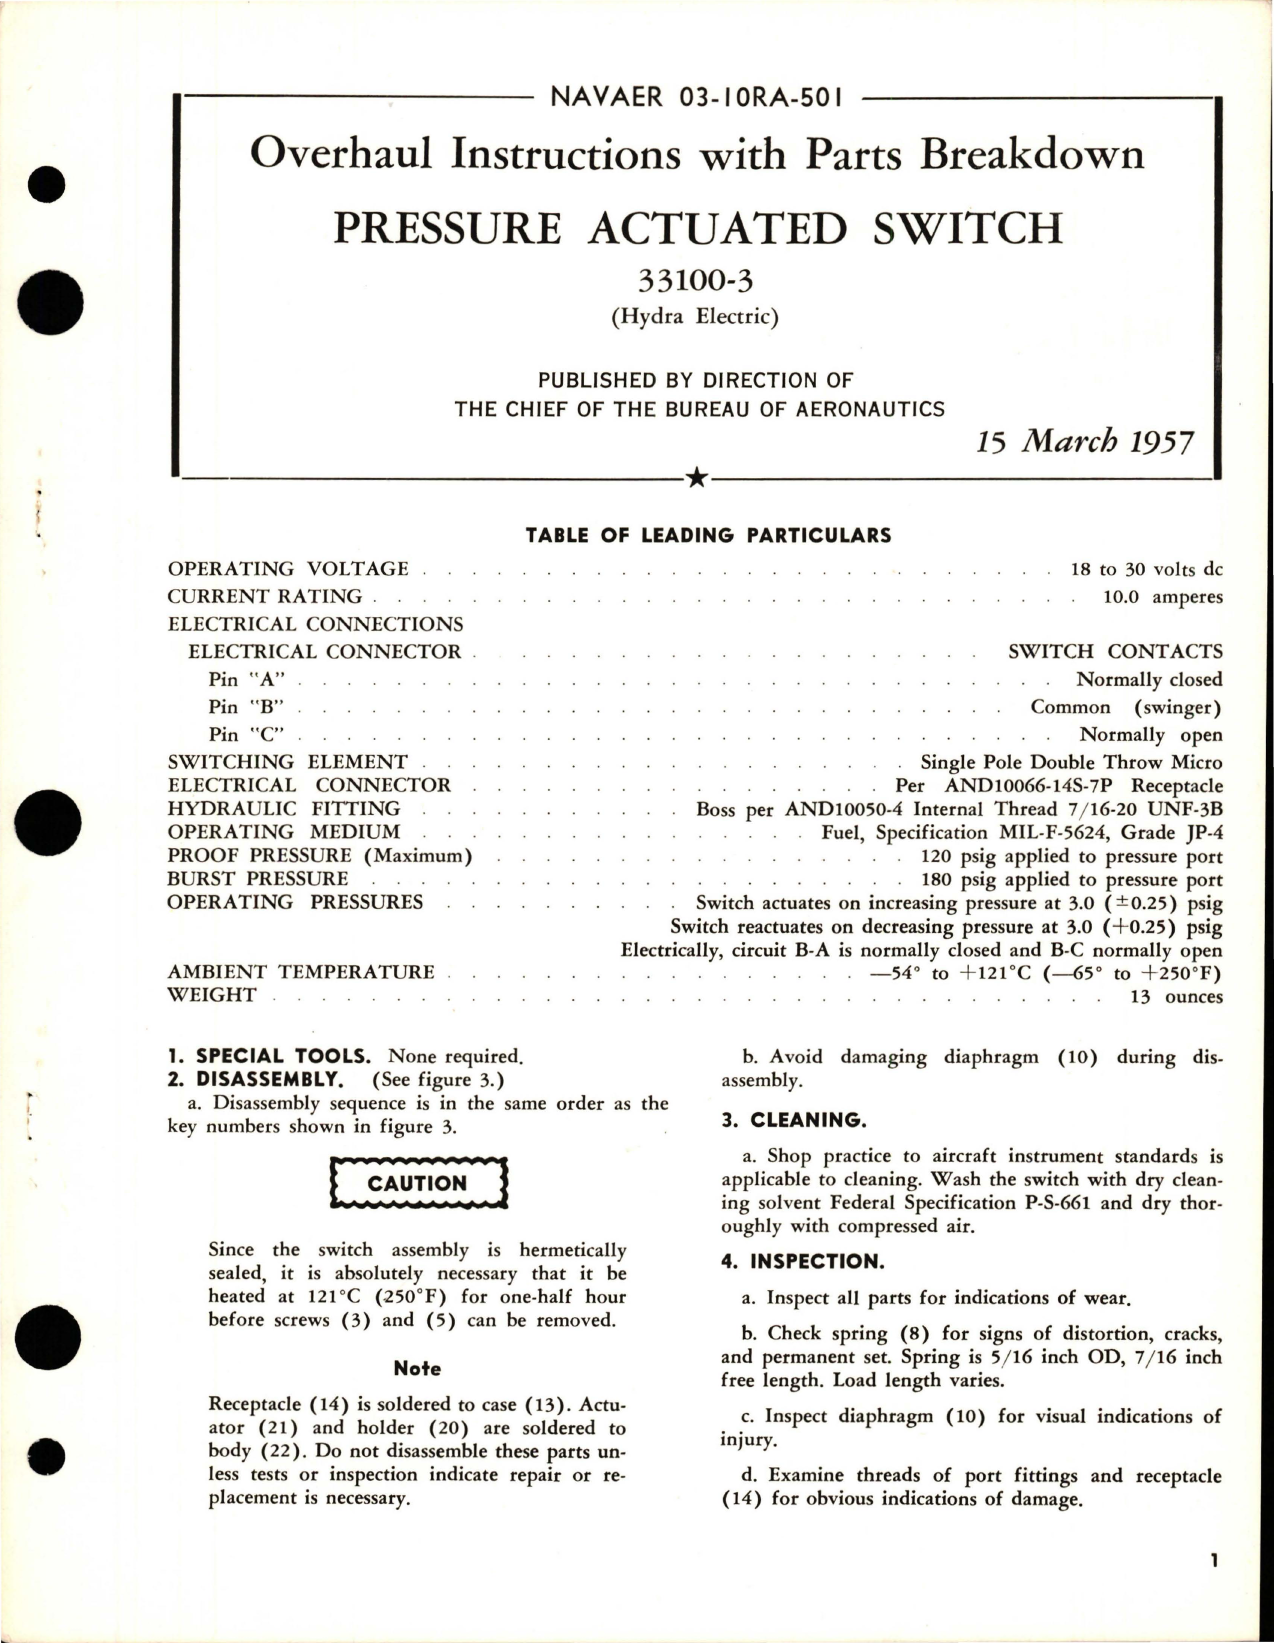 Sample page 1 from AirCorps Library document: Overhaul Instructions with Parts Breakdown for Pressure Actuated Switch - 33100-3 